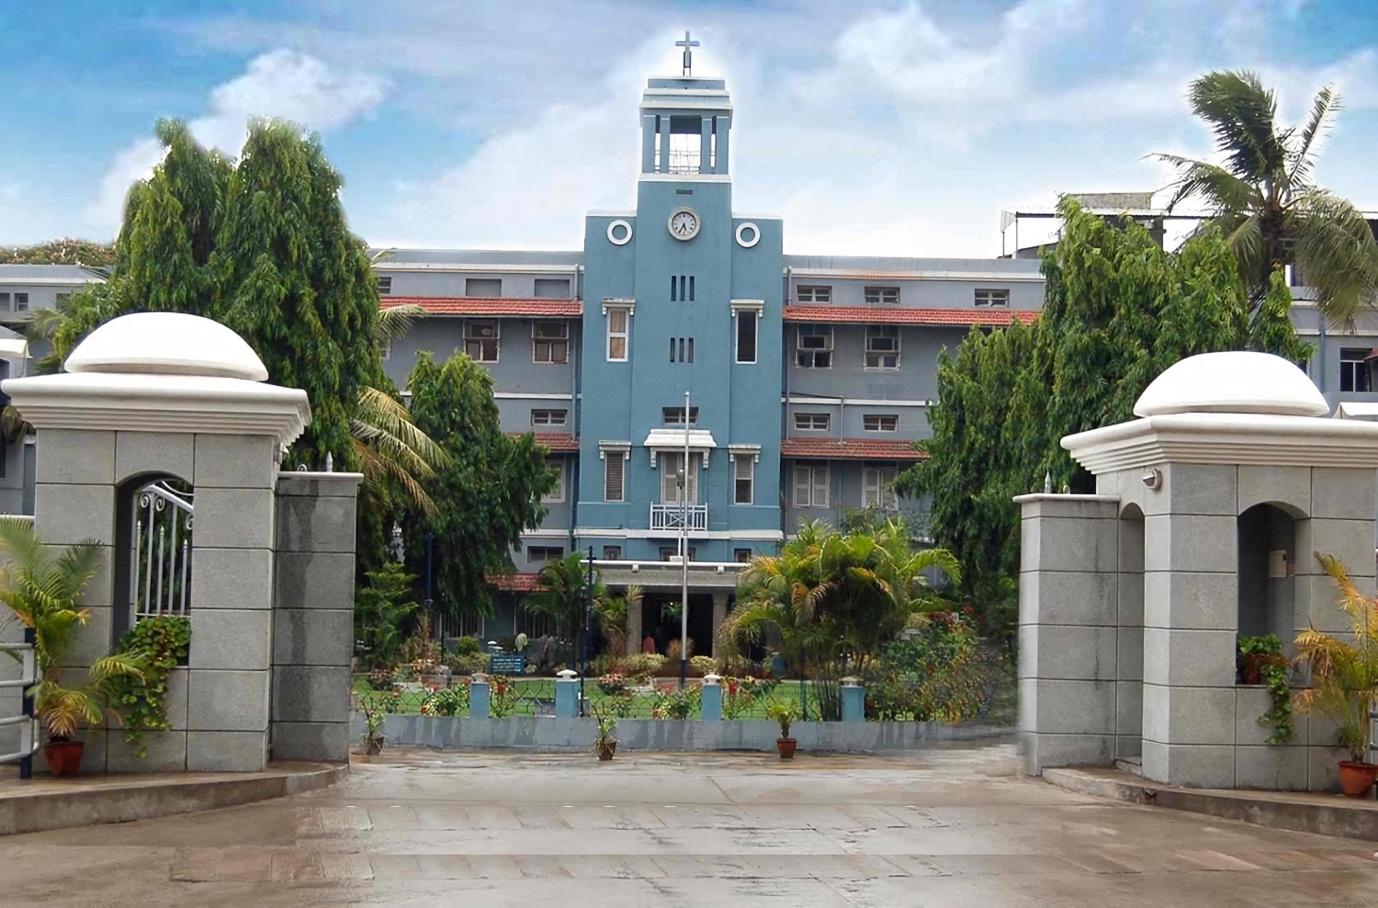 Christian Medical College Vellore is one of the best colleges for MBBS Education